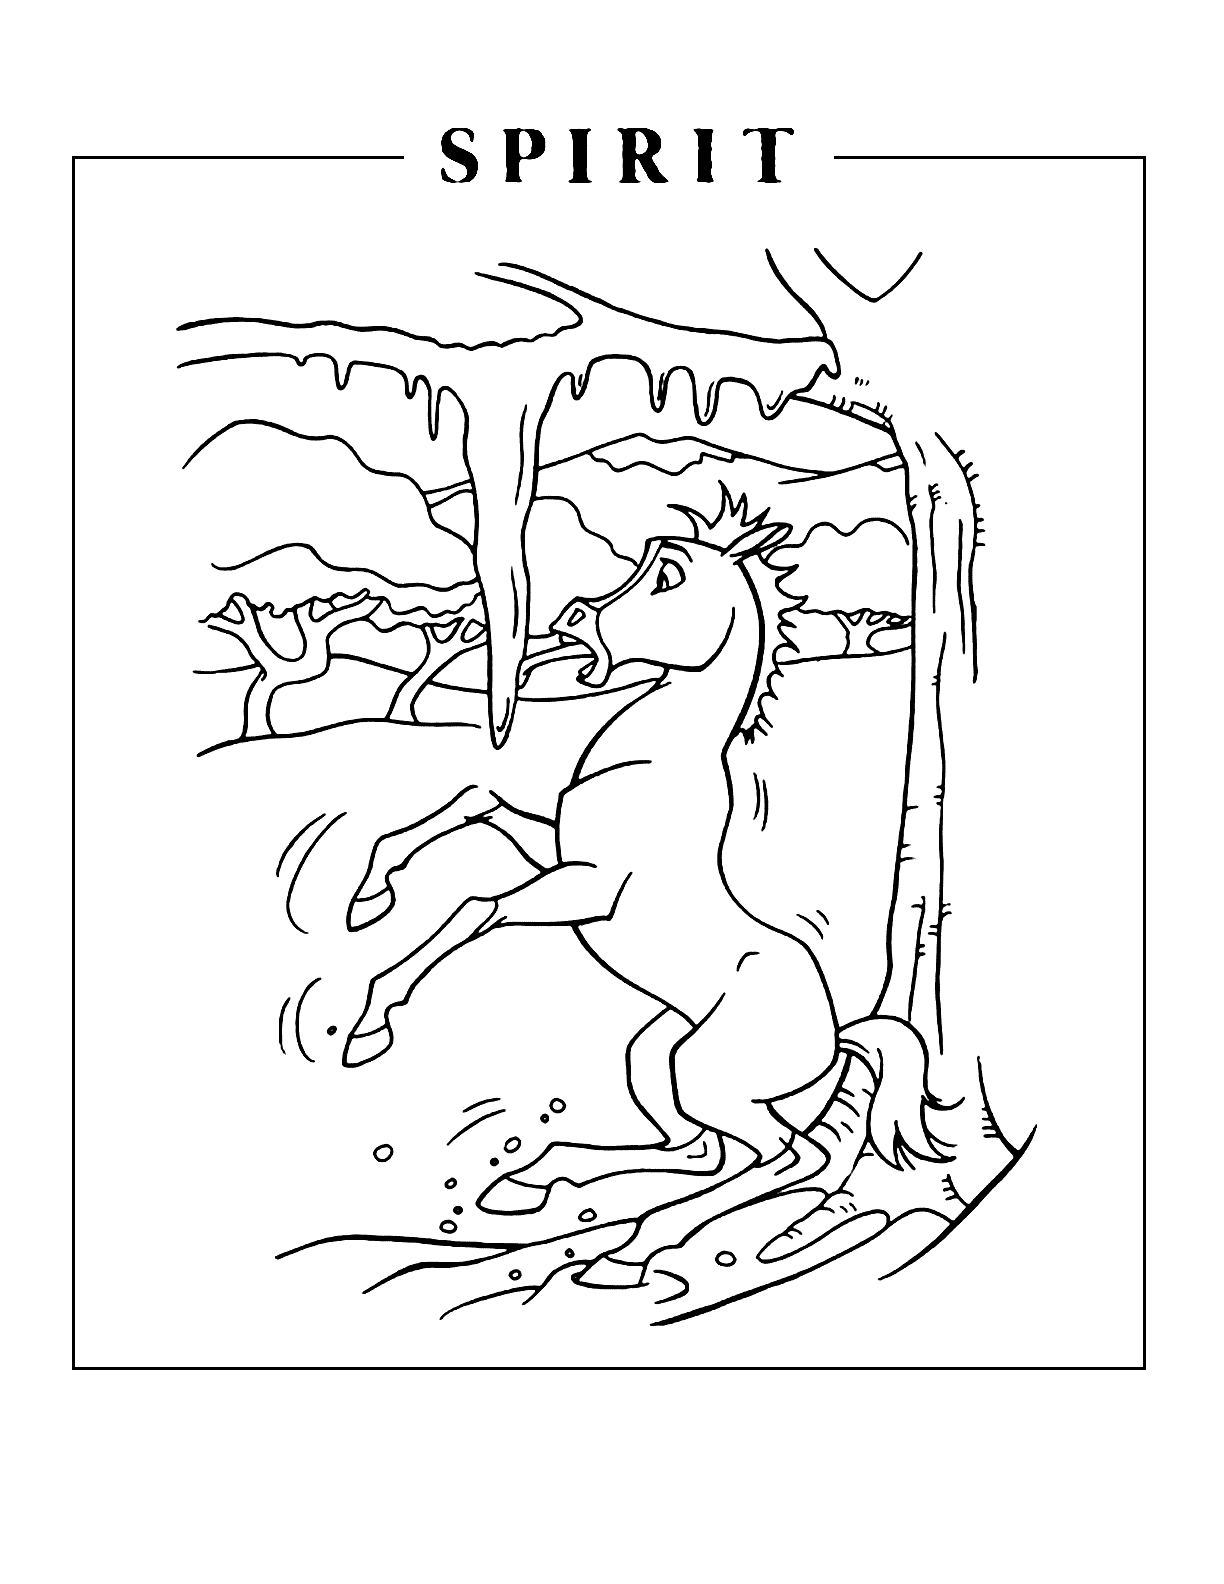 Spirits Tongue Stuck To Icicle Coloring Page